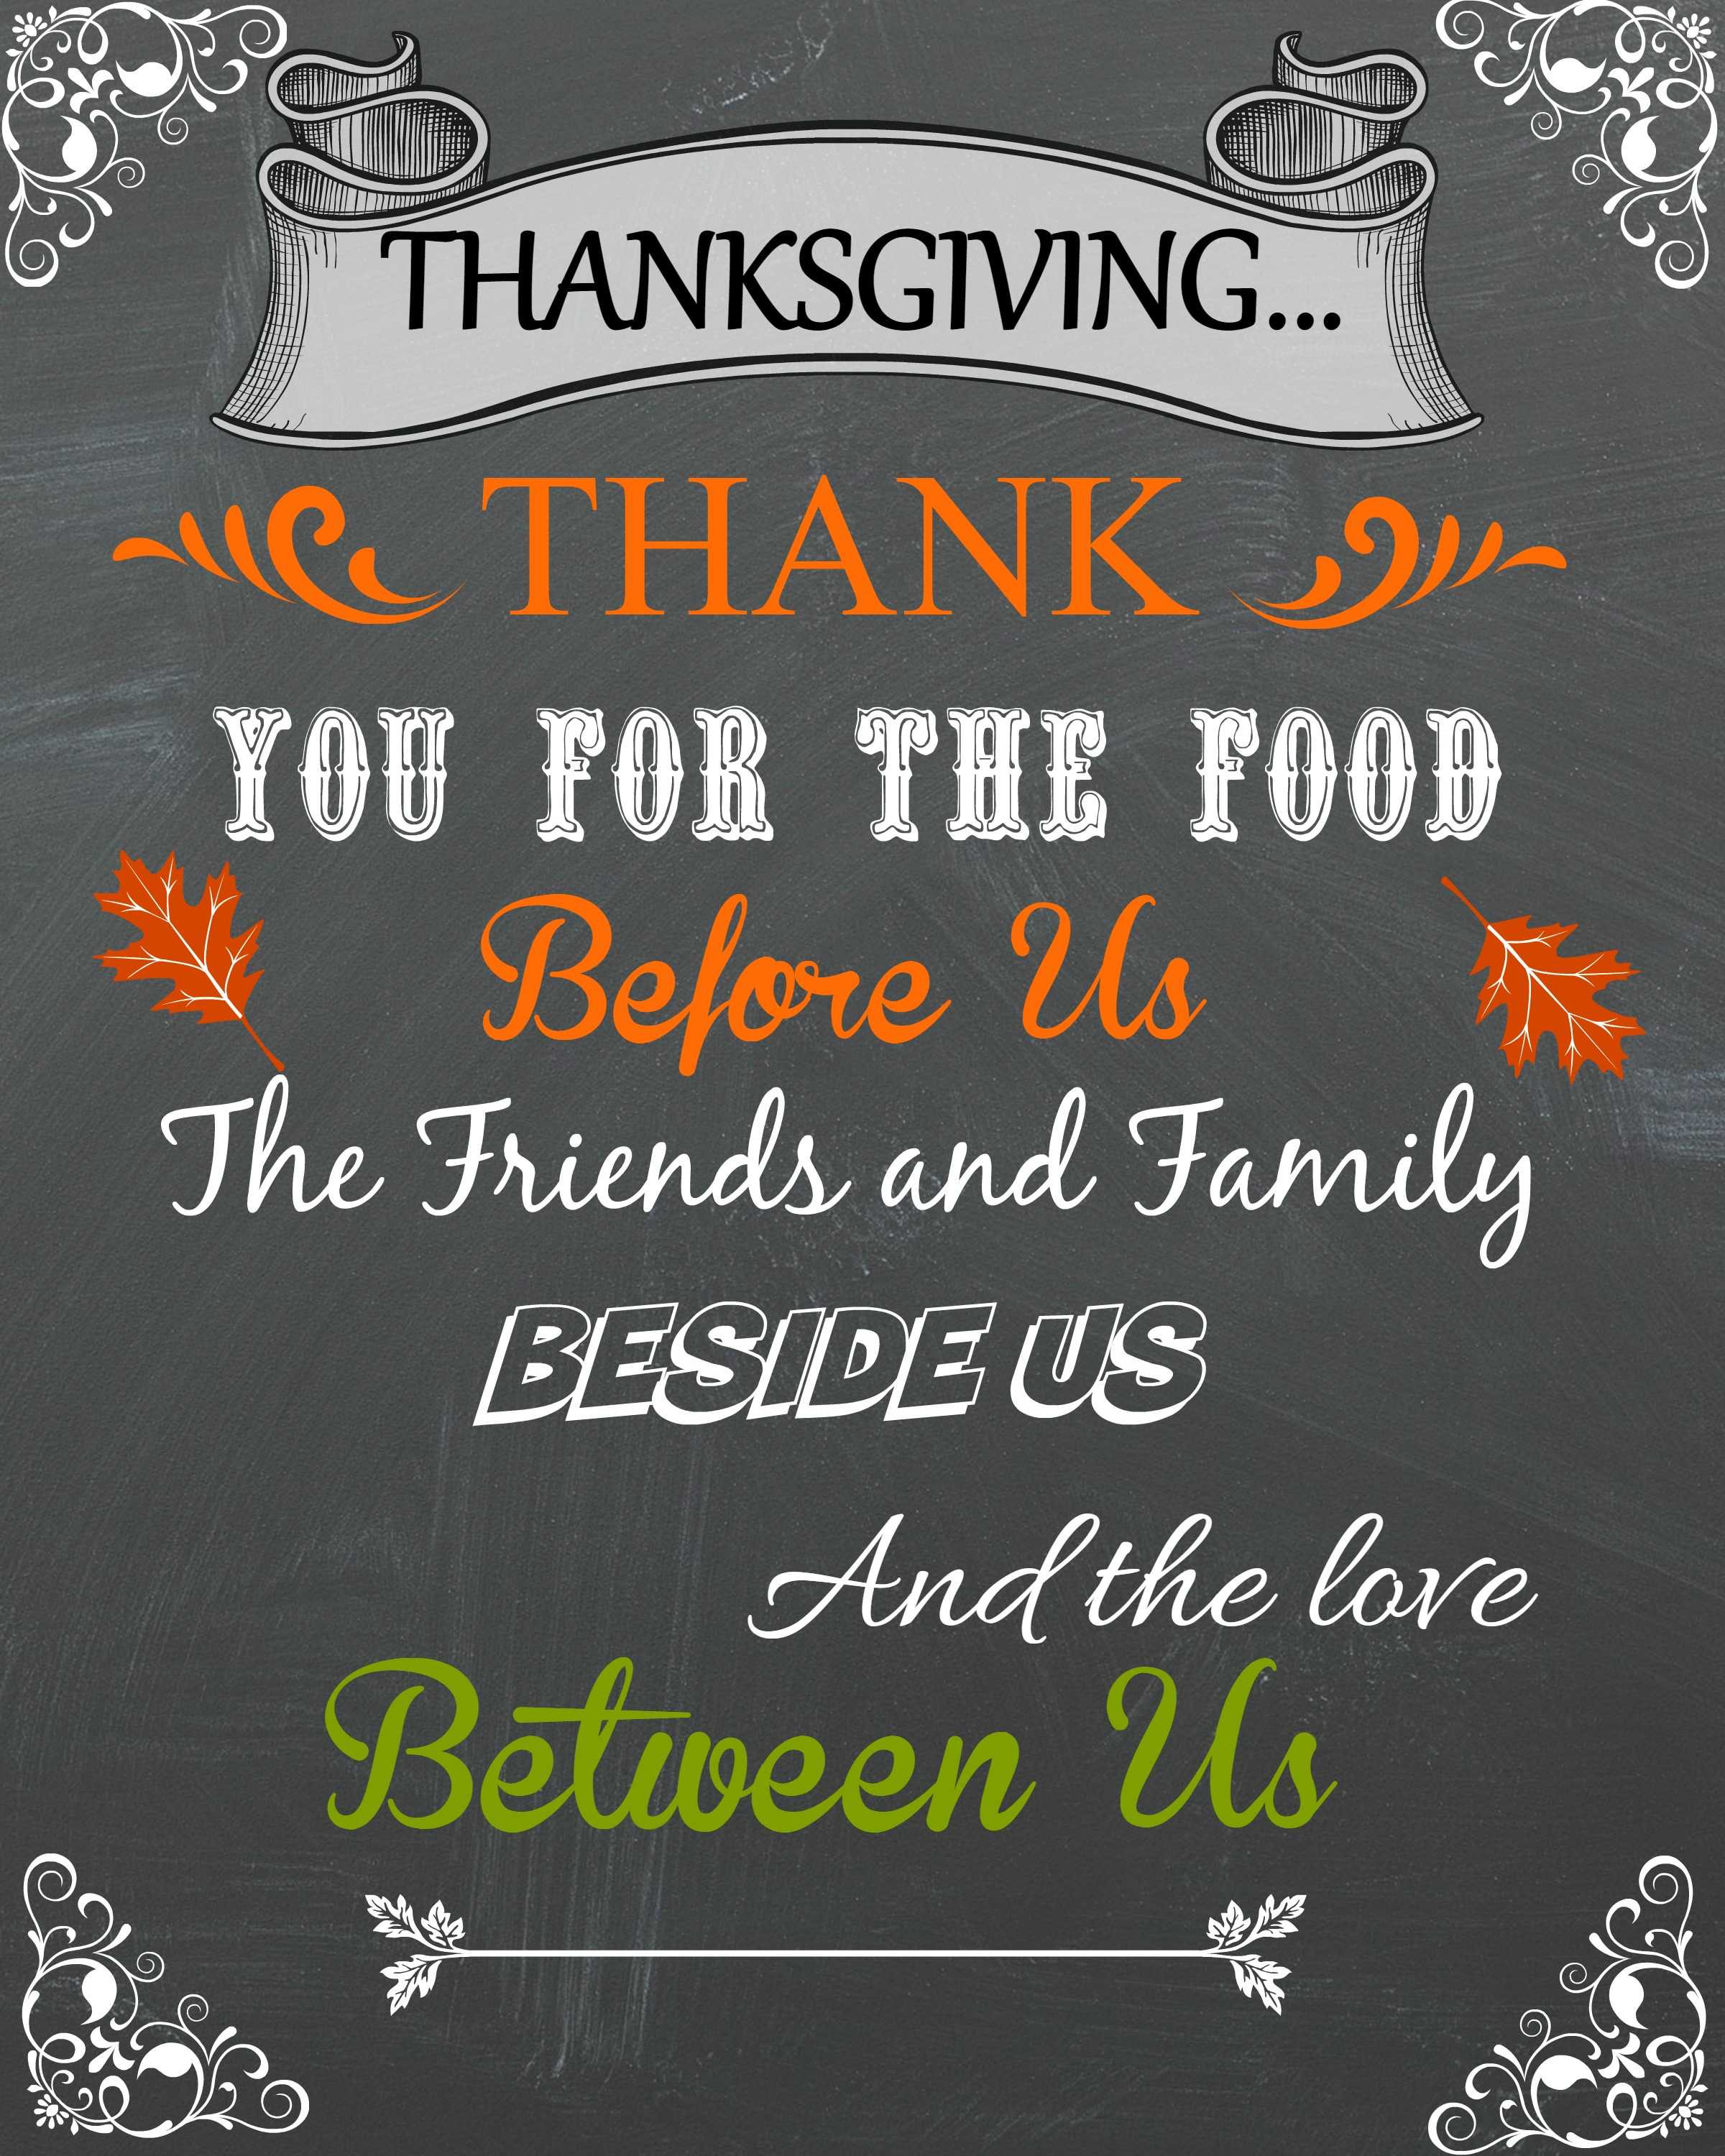 Thanksgiving Blessings Quotes
 Blessings Debbiedoos